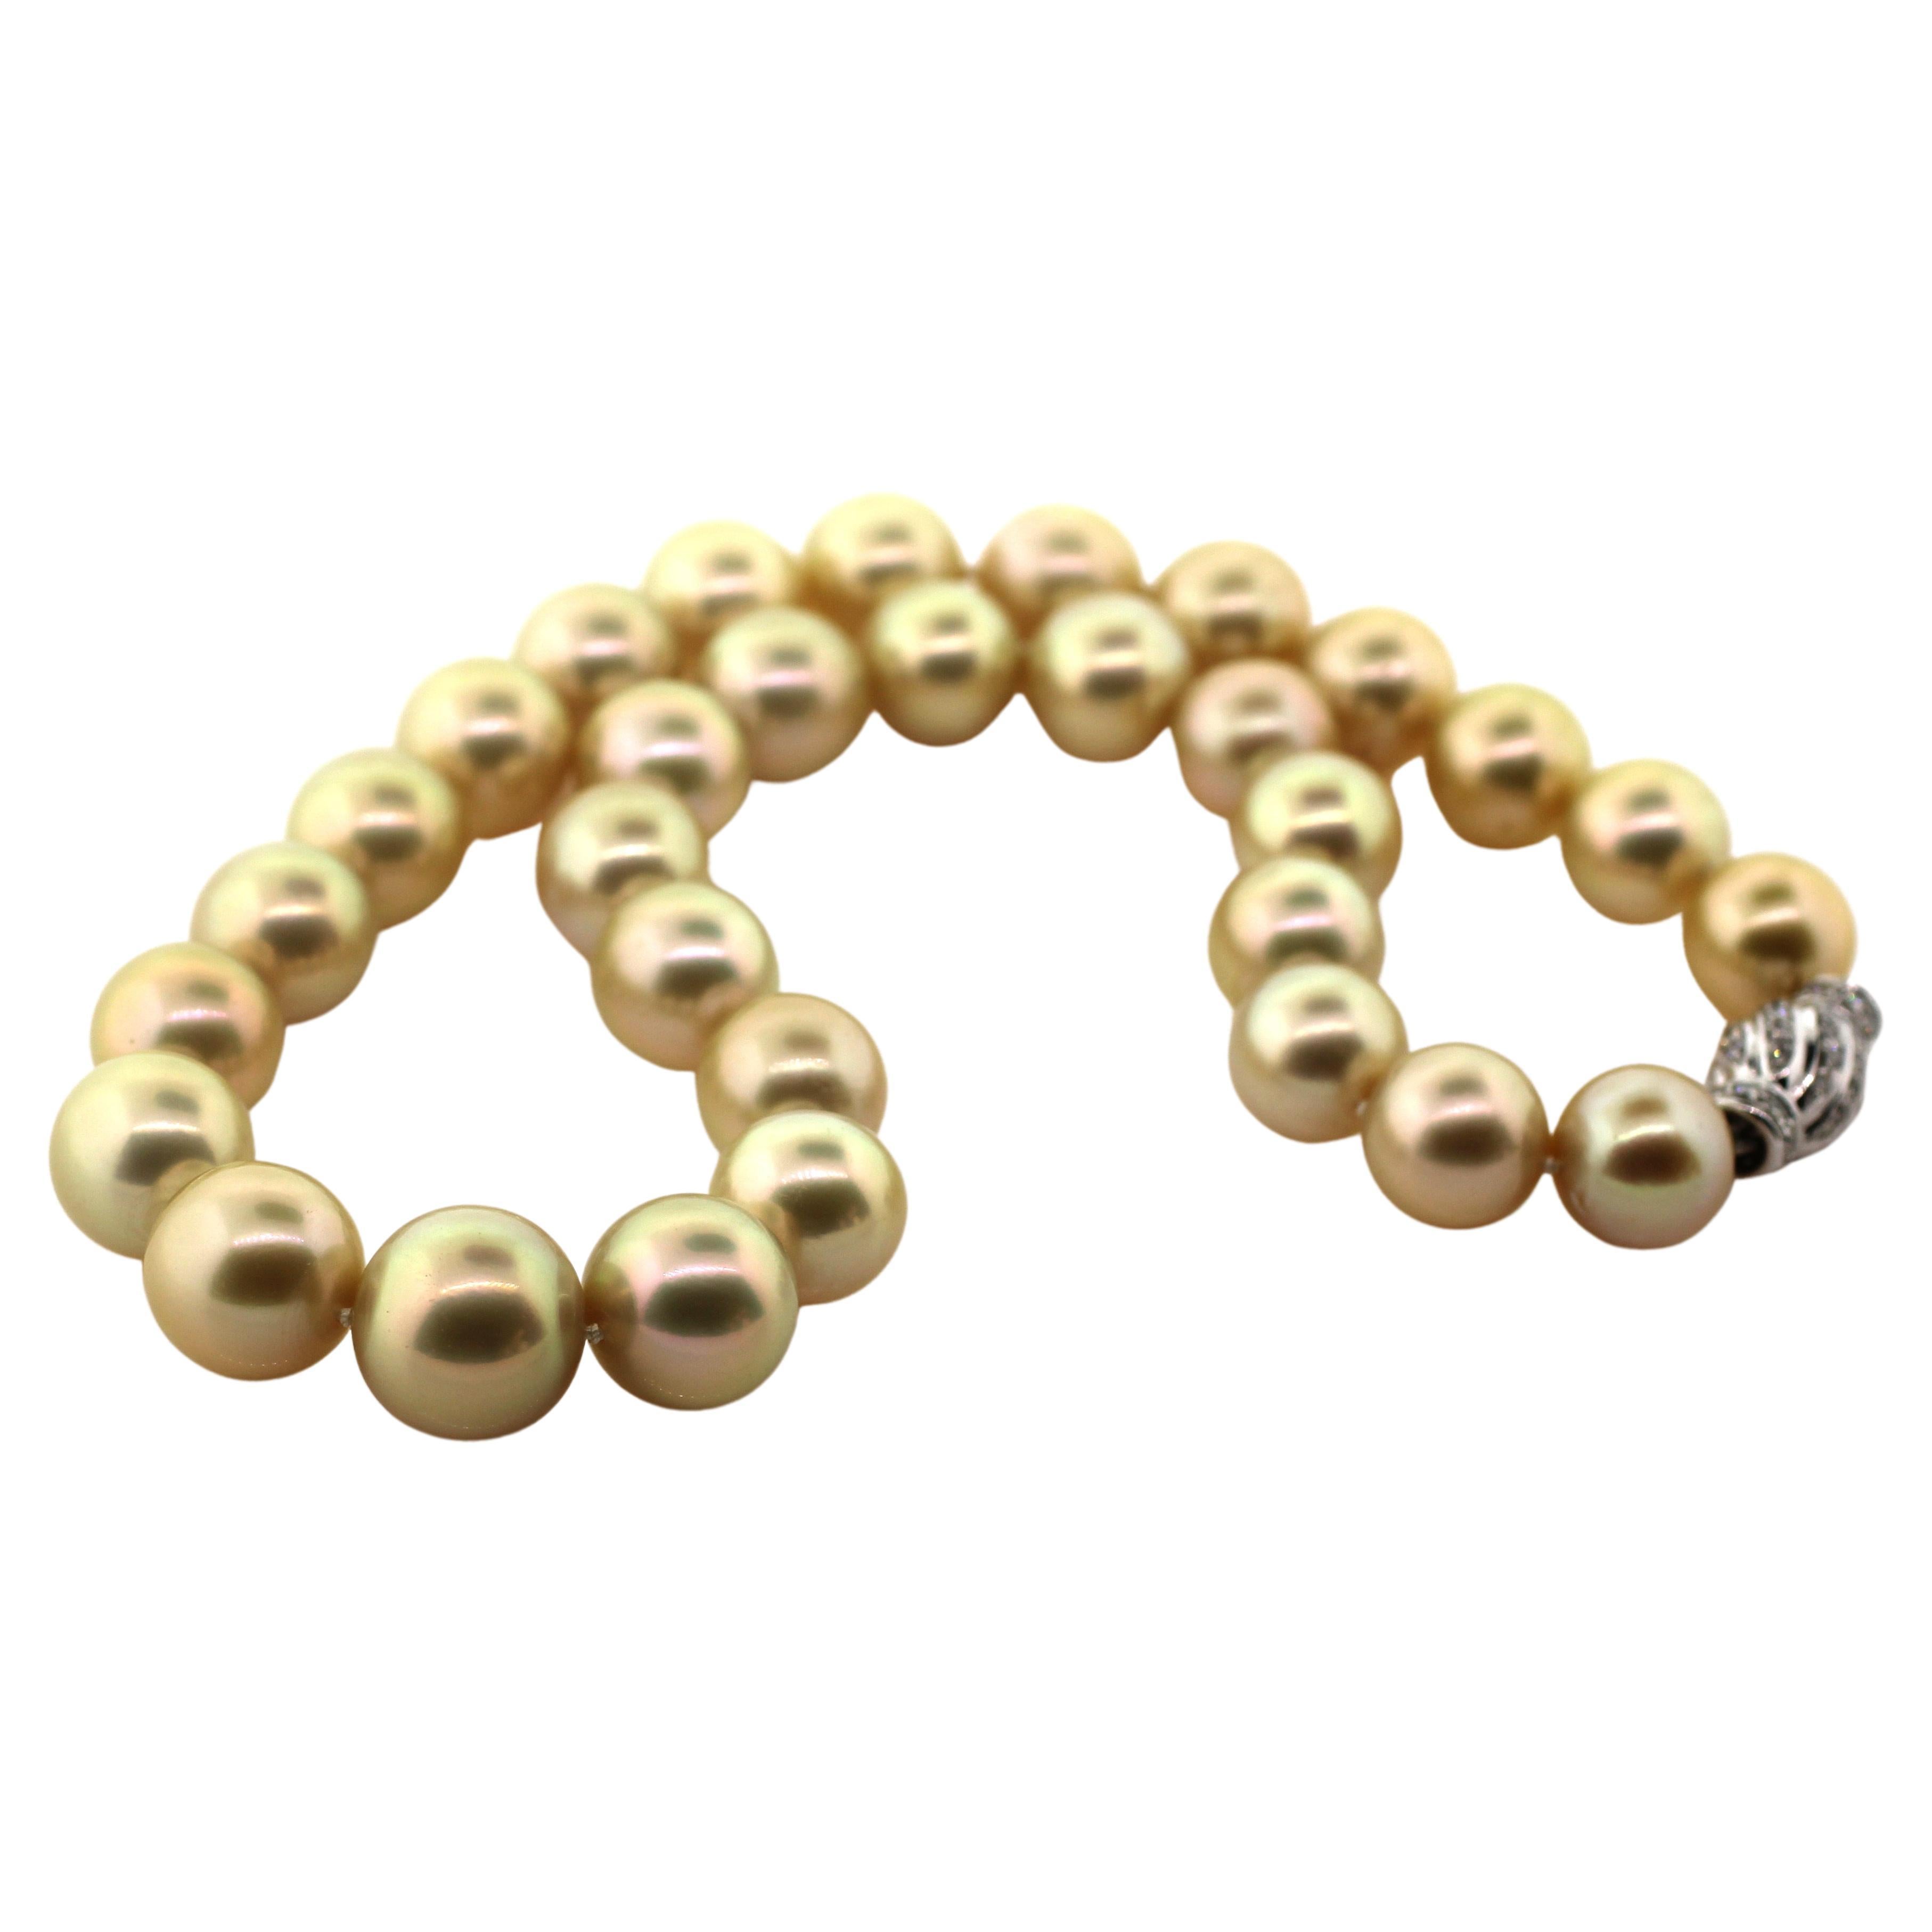 Hakimoto By Jewel Of Ocean 18K South Sea Strand Necklace
18K White Gold  With Diamonds
Weight (g): 93.7
Cultured Natural Golden Color South Sea Pearl 
Pearl Size: 12X14.5mm 
Pearl Shape: Round 
Body color: Golden
Orient: Very Good
Luster: Very Good